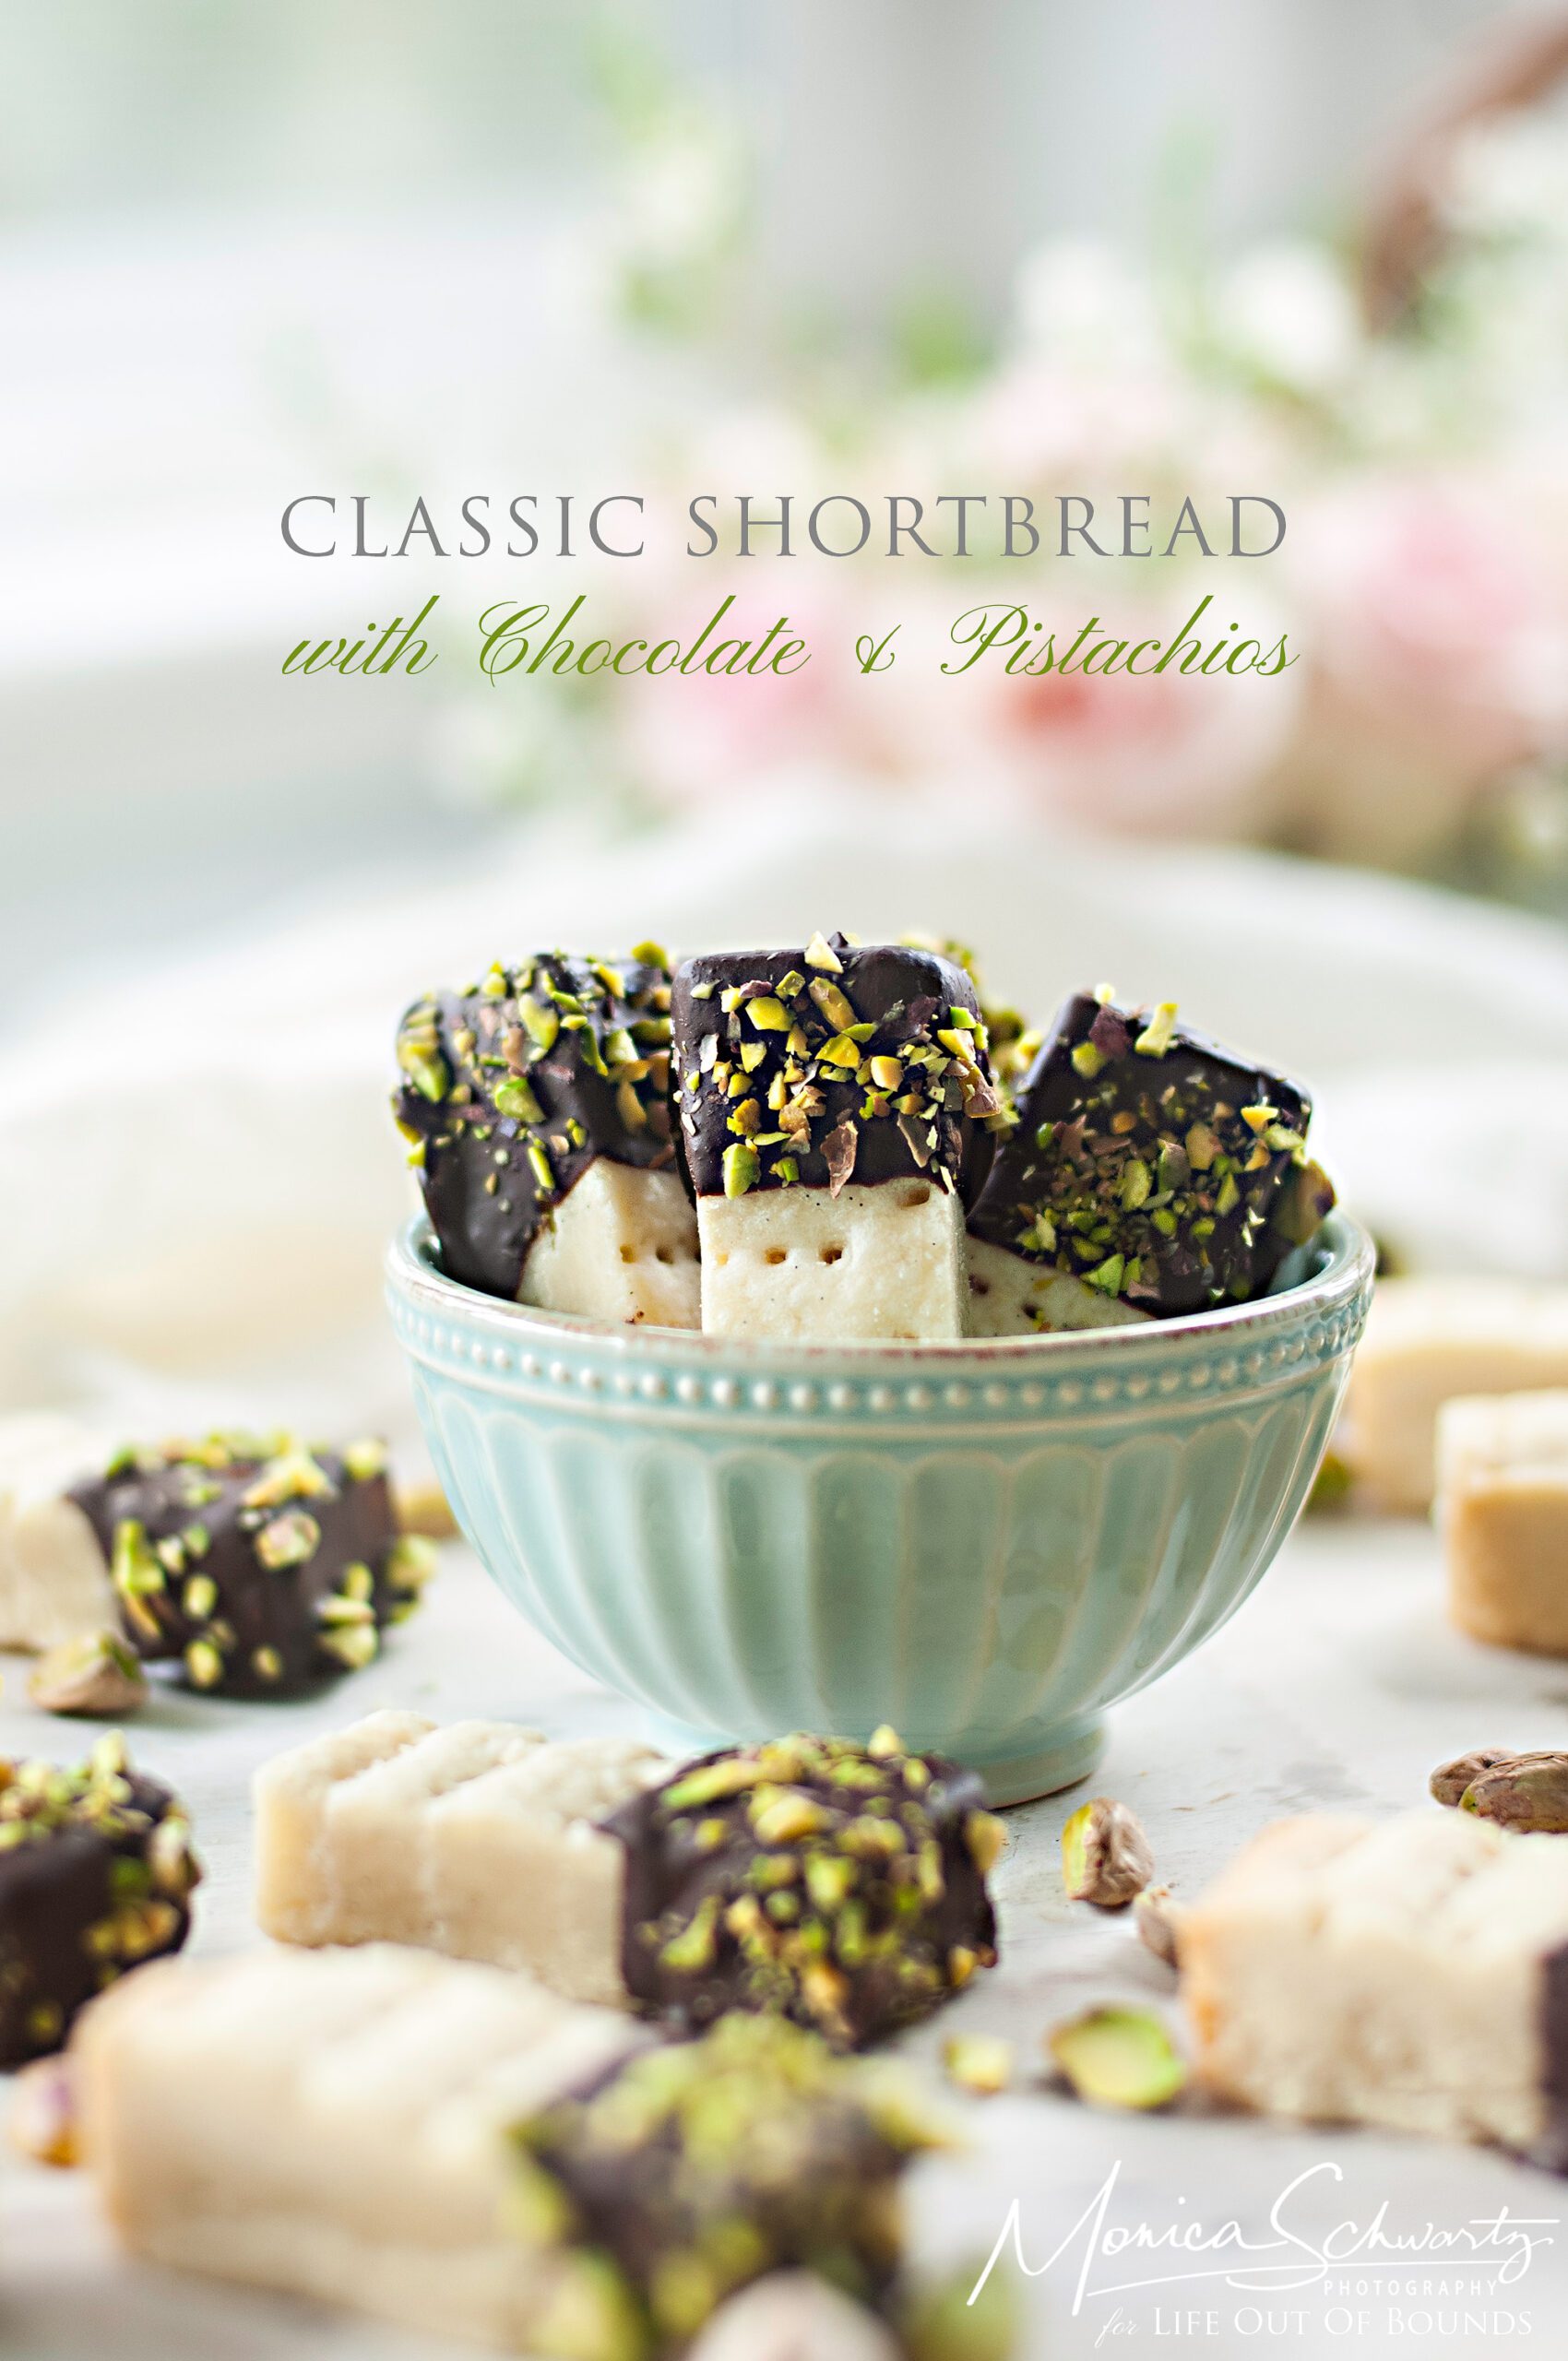 Classic-shortbread-with-chocolate-and-pistachios-recipe